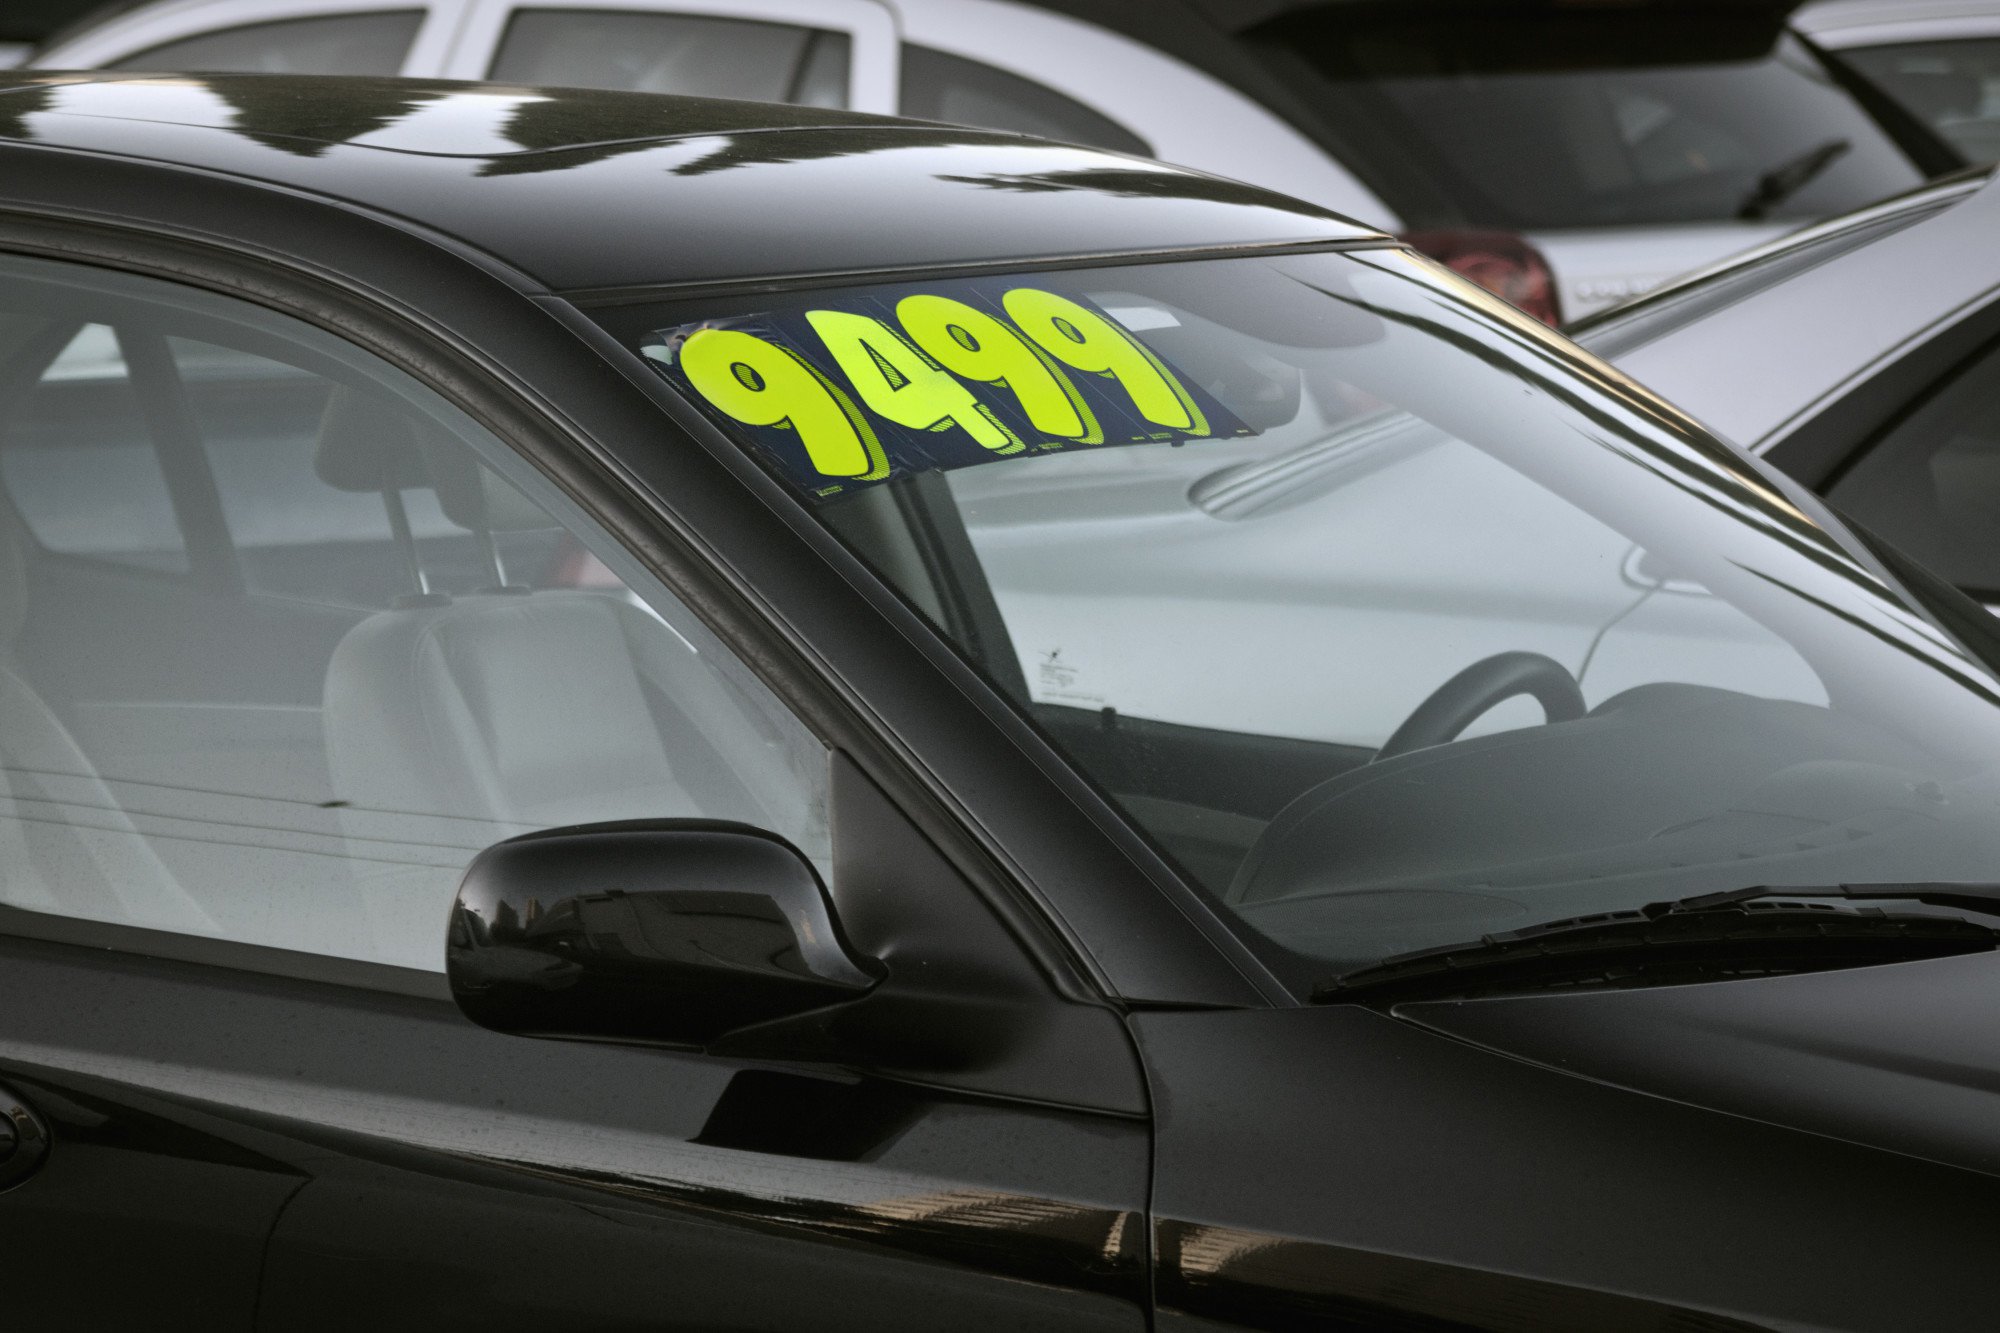 Who Buys Used Cars? Your Options For Selling a Used Car In Any Condition